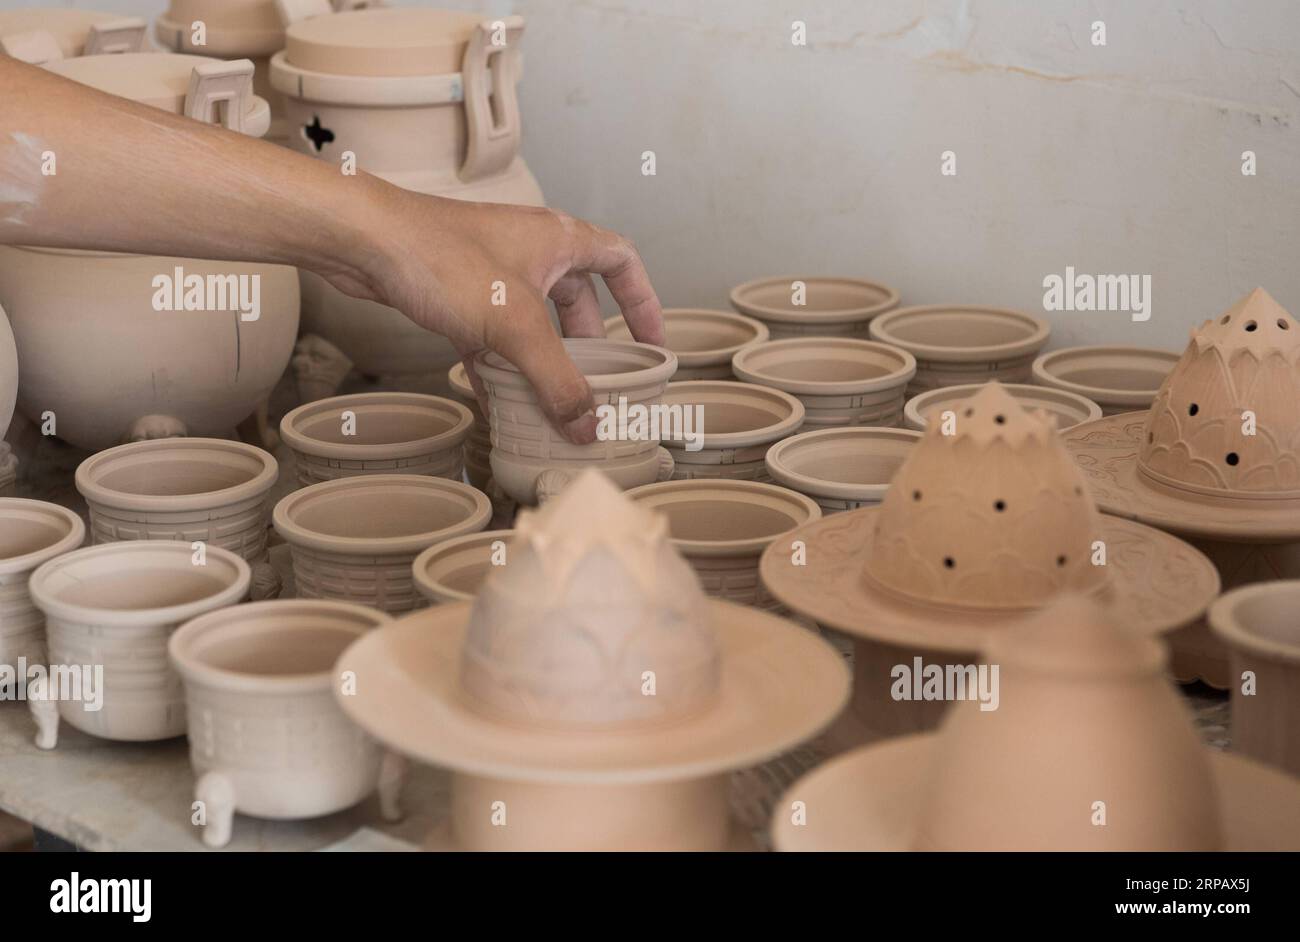 (190520) -- LONGQUAN, May 20, 2019 (Xinhua) -- Lin Song checks clay bases for celadon incense burners at his studio in Longquan, east China s Zhejiang Province, May 20, 2019. Born in 1993, Lin Song is a native of Longquan, home to China s best celadon wares. He received professional training in both his hometown and Jingdezhen, another important porcelain hub of China. Lin had also followed other celadon artisans for years before setting up a studio back home in 2014, focusing on the replication of classical celadon incense burners. Lin s personal collection has grown to over 40 celadon incens Stock Photo